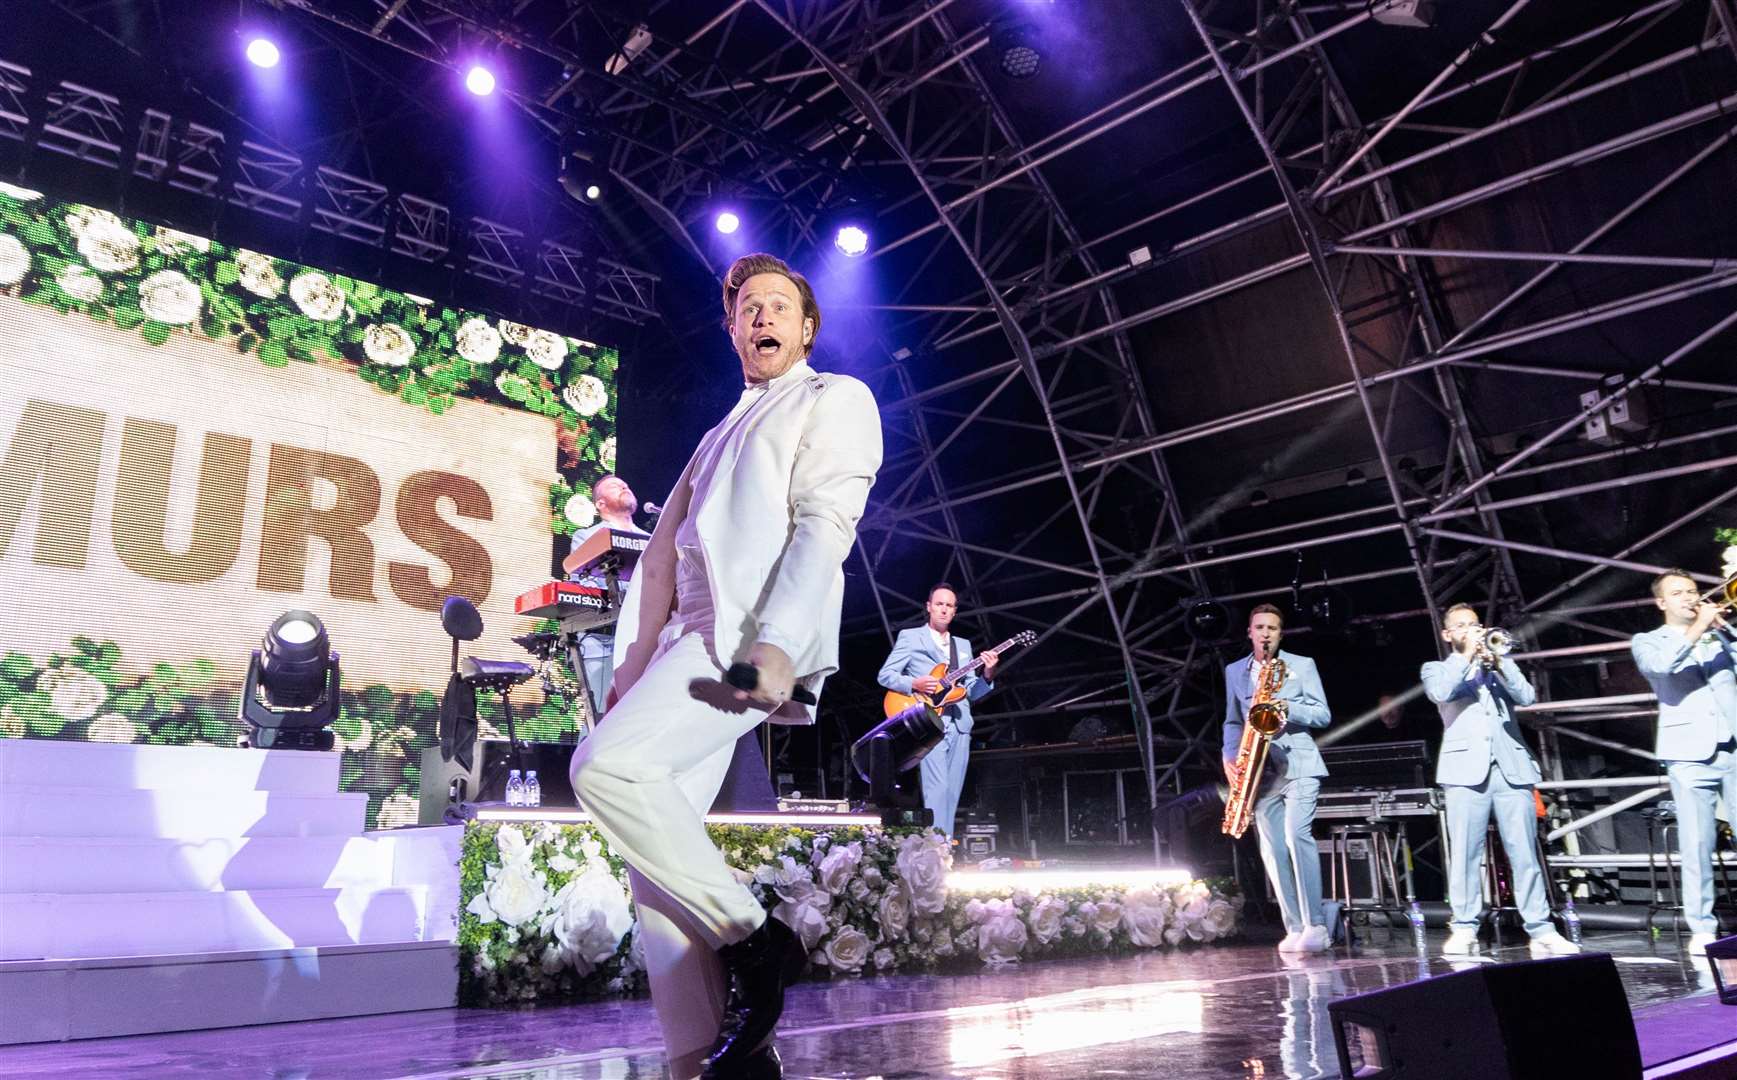 Olly Murs brought a showman quality to his open-air concert. Picture: Jasmine Marceau